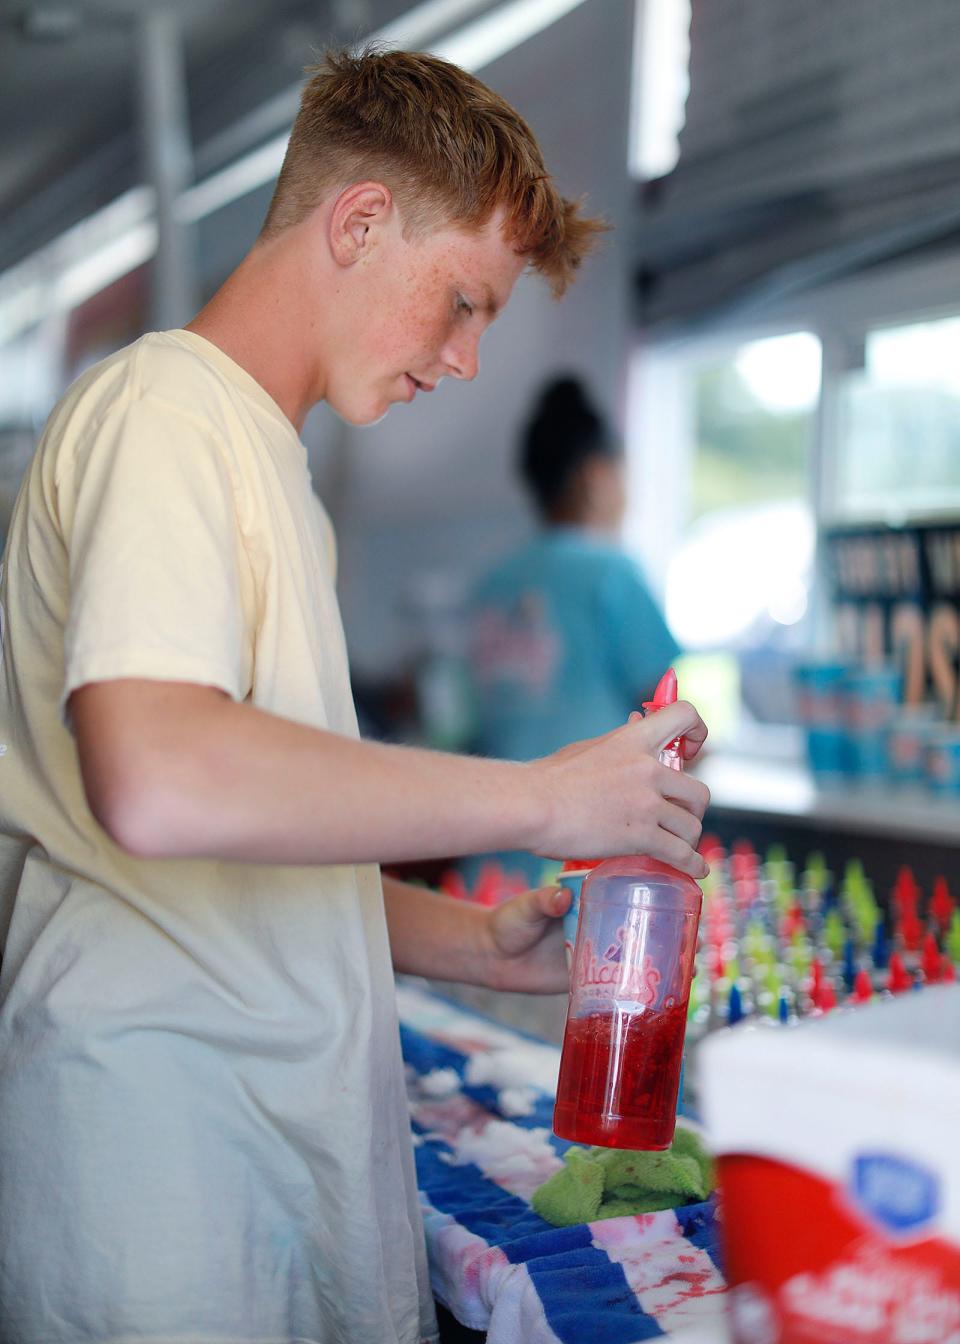 Pelican's employee Conor Walsh, 15, serves SnoBalls at Pelican's in Brant Rock on Thursday, Aug. 18, 2022.